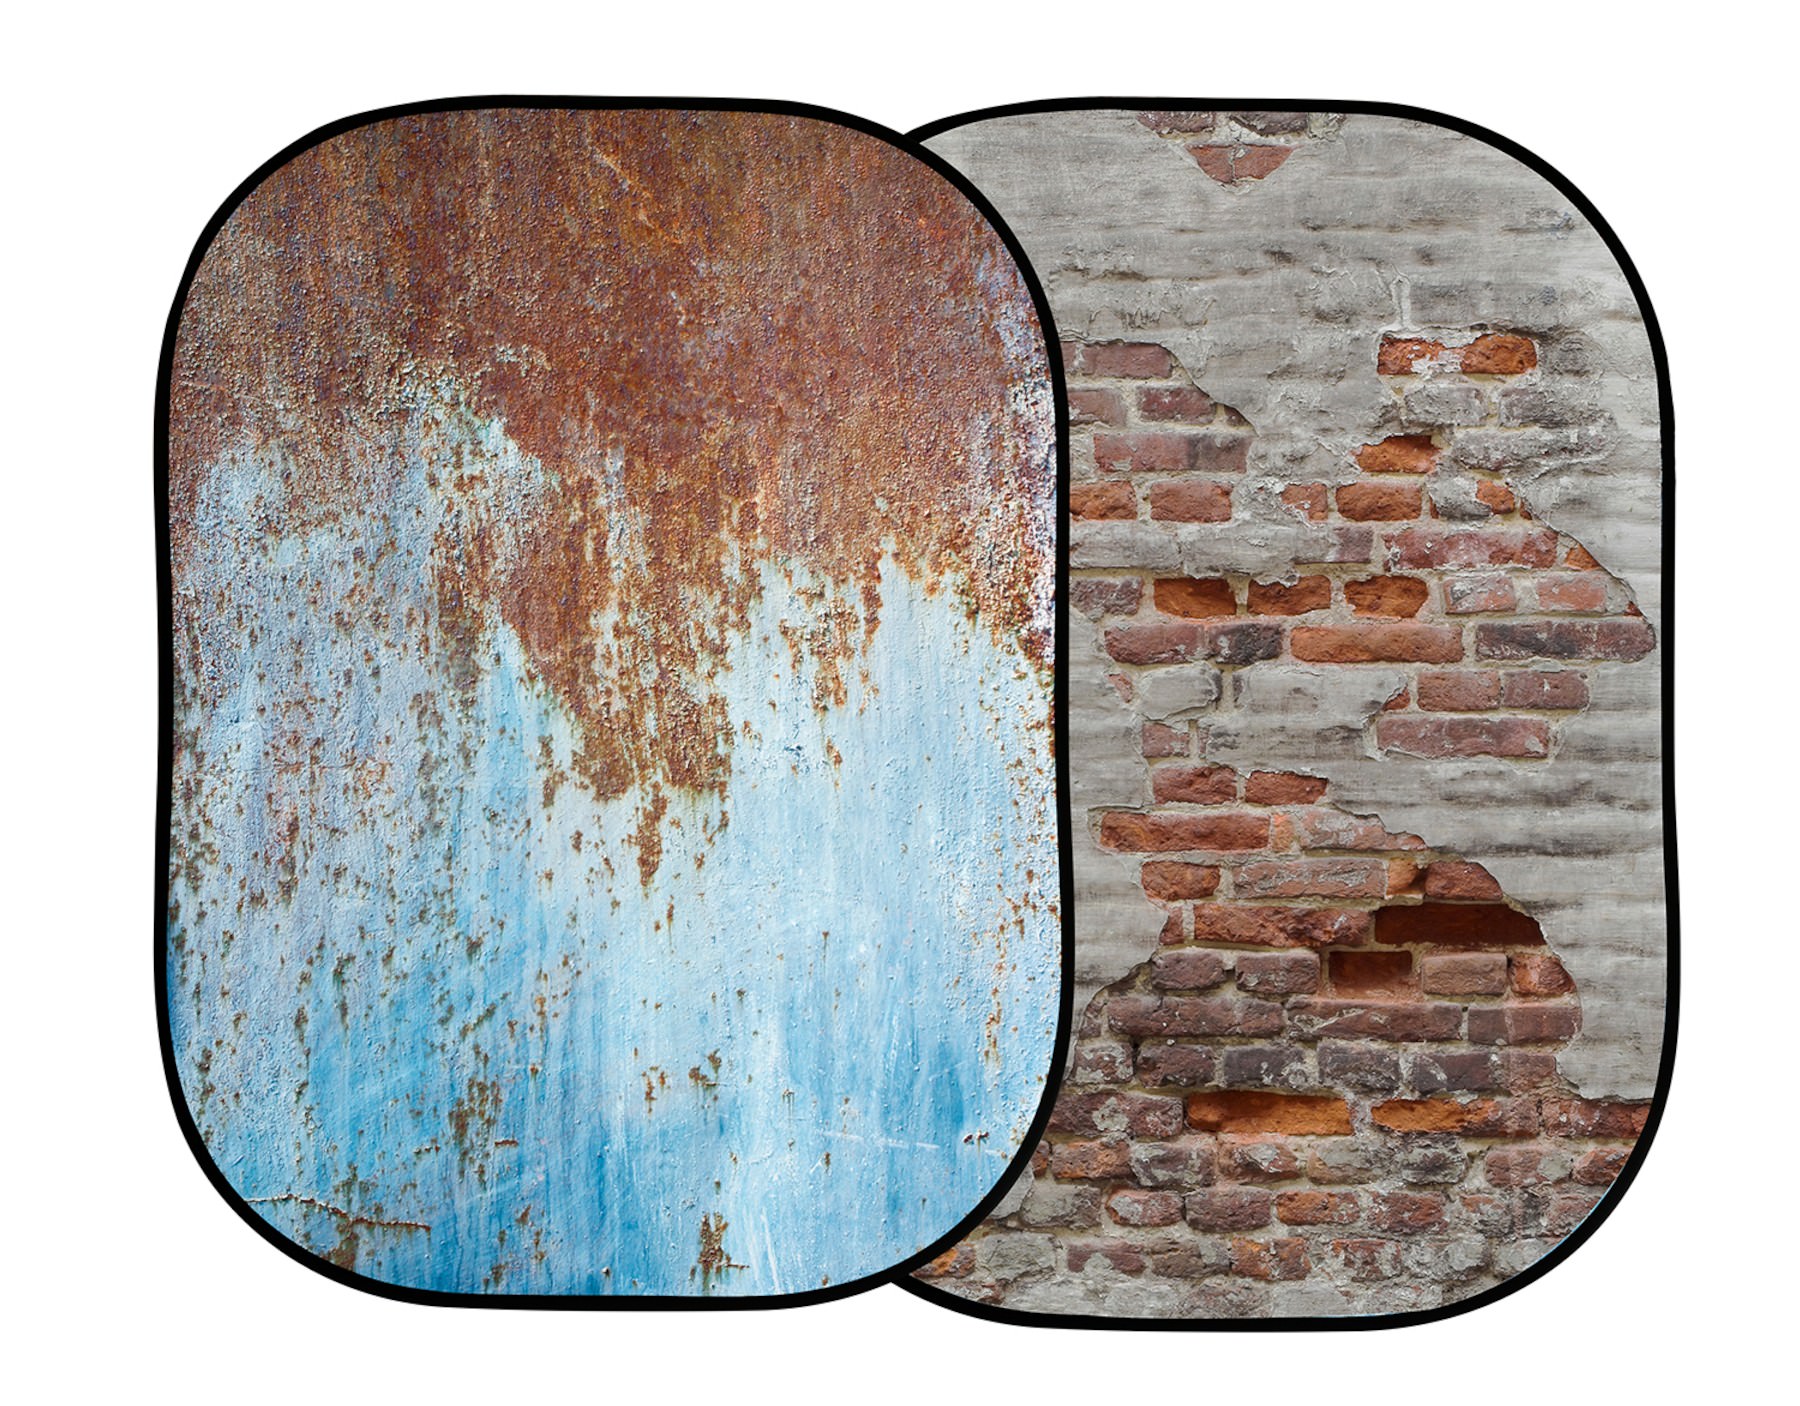 Urban Collapsible 1.5 x 2.1m Rusty Metal/Plaster Wall